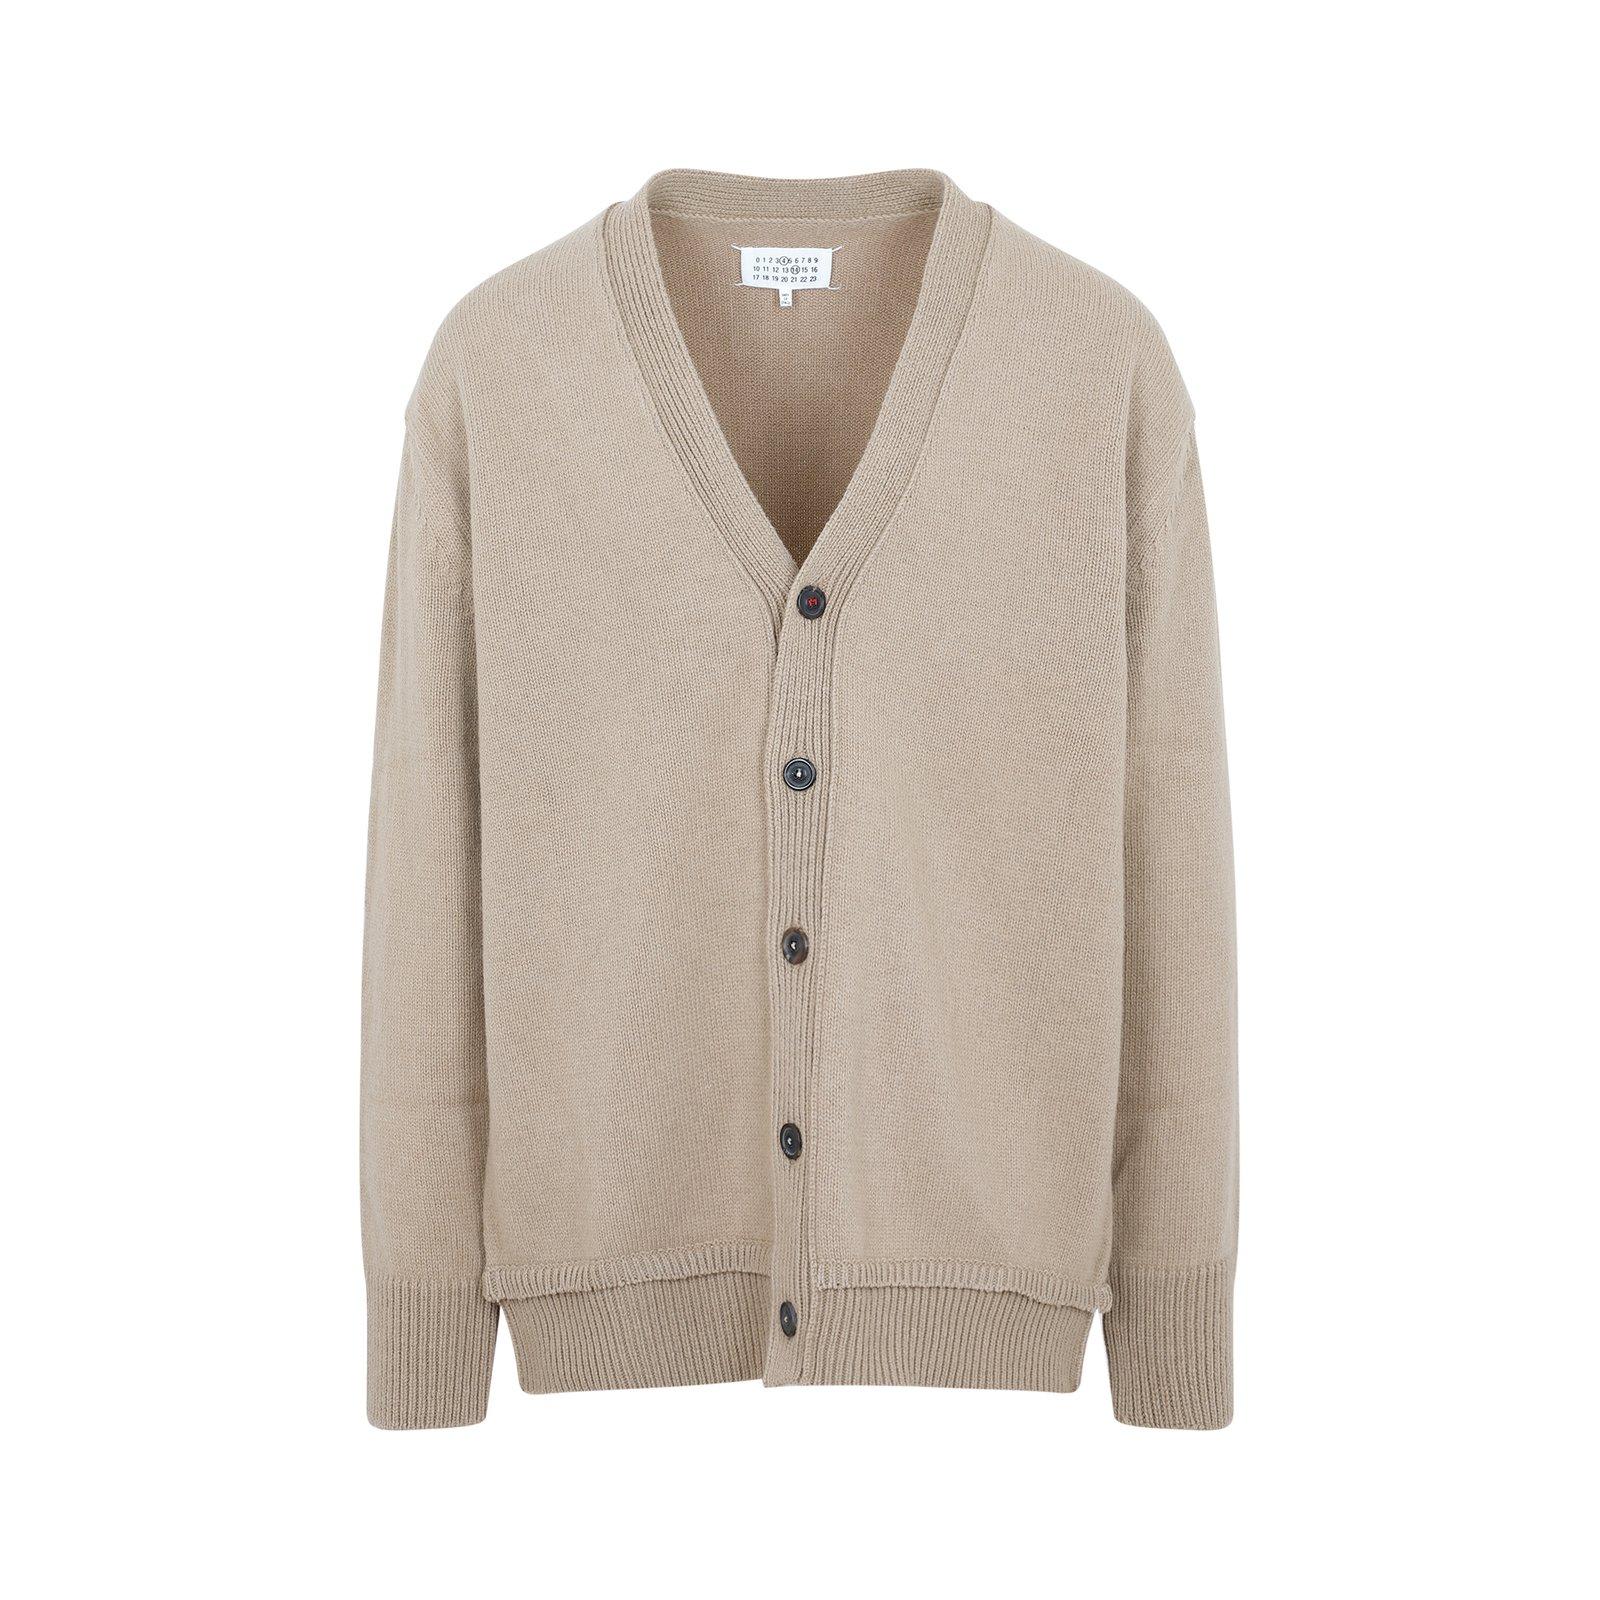 Maison Margiela Buttoned Knitted Cardigan